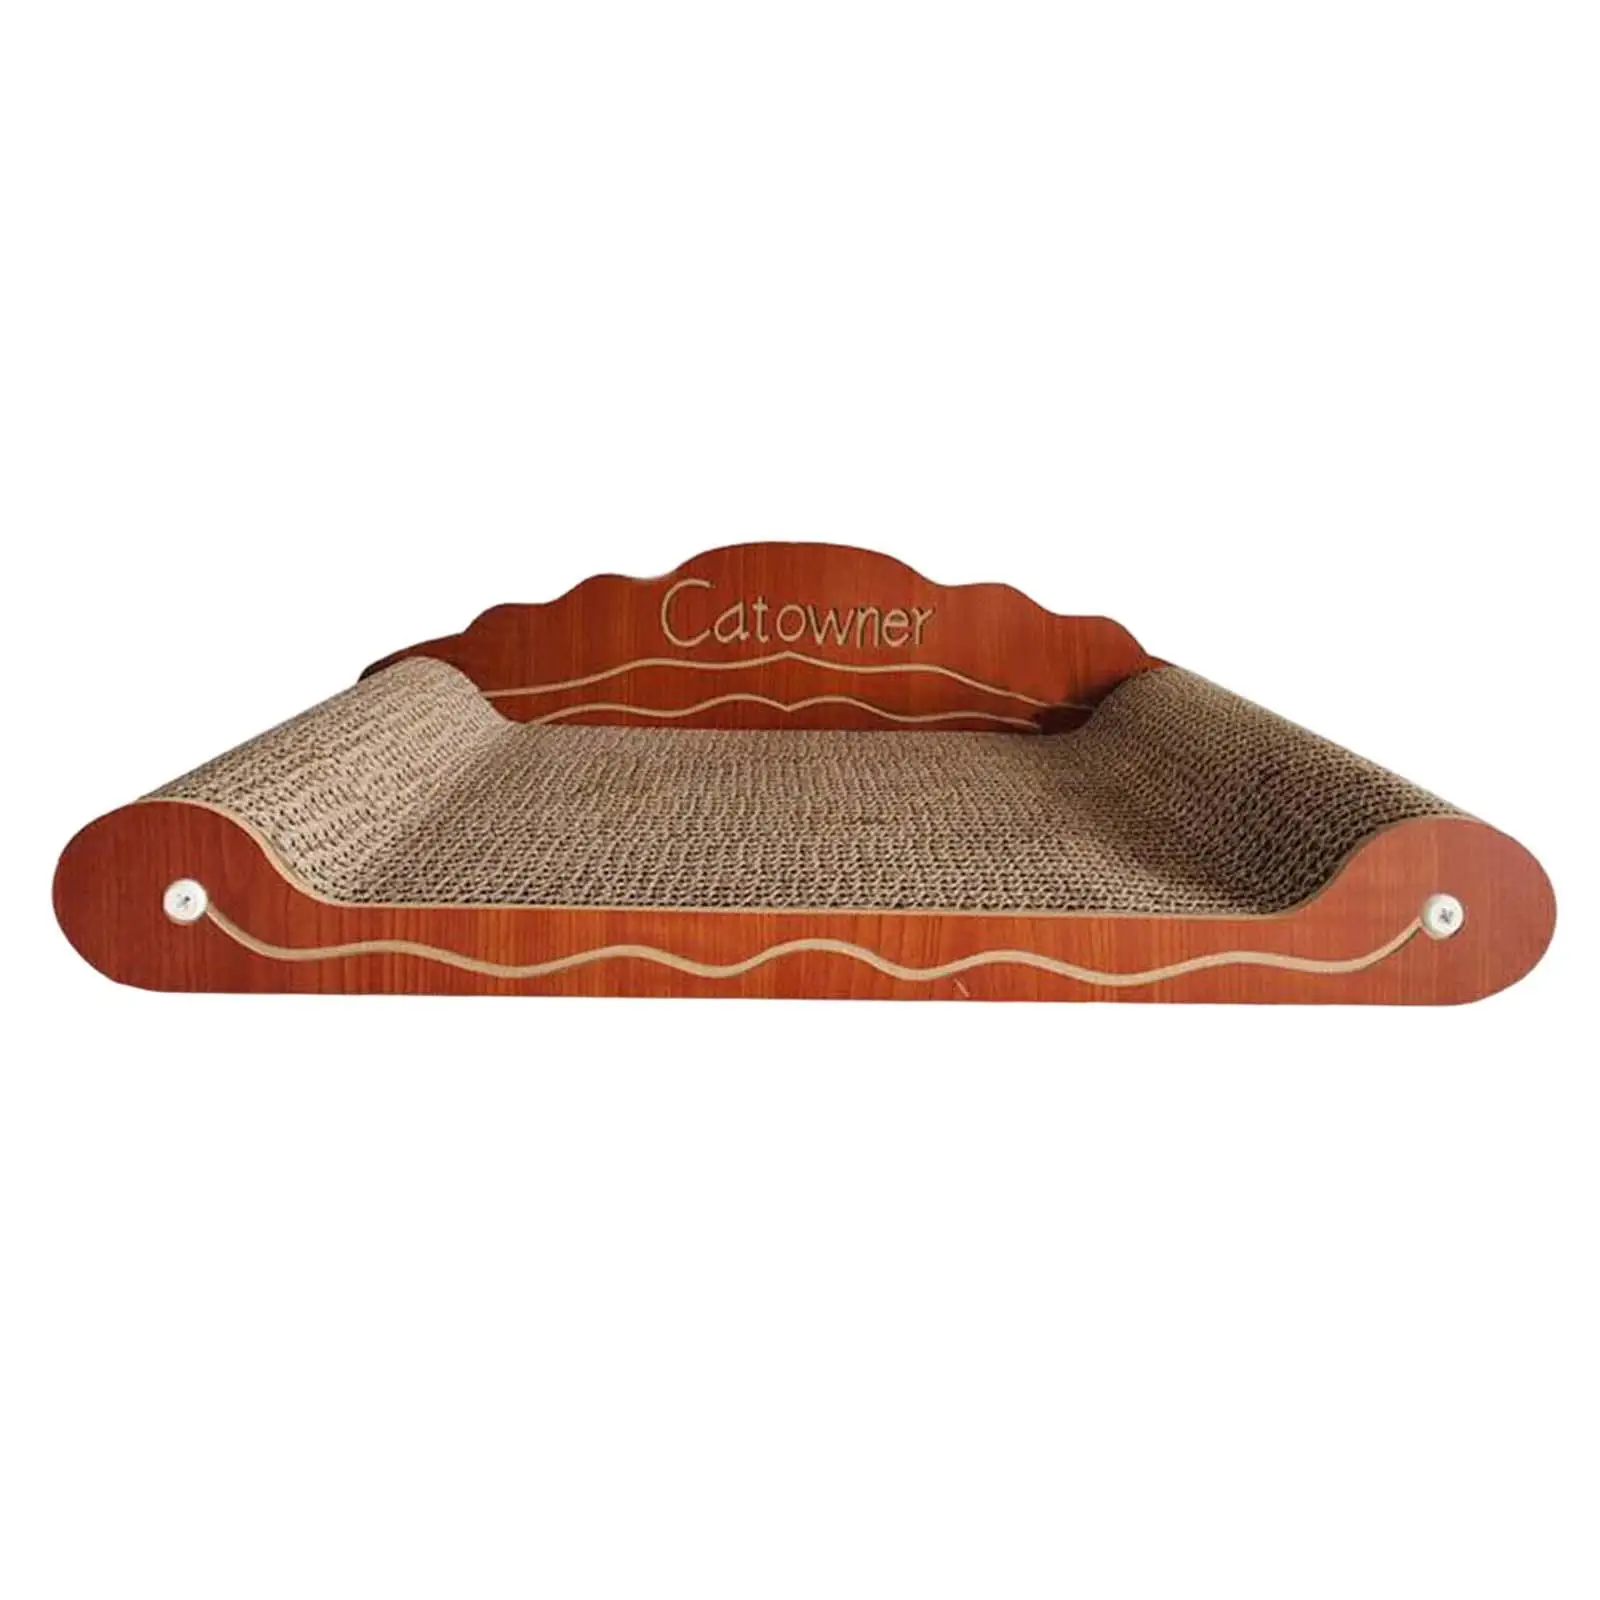 Cat Scratcher Bed Corrugated Cardboard Sturdy Stable and Durable